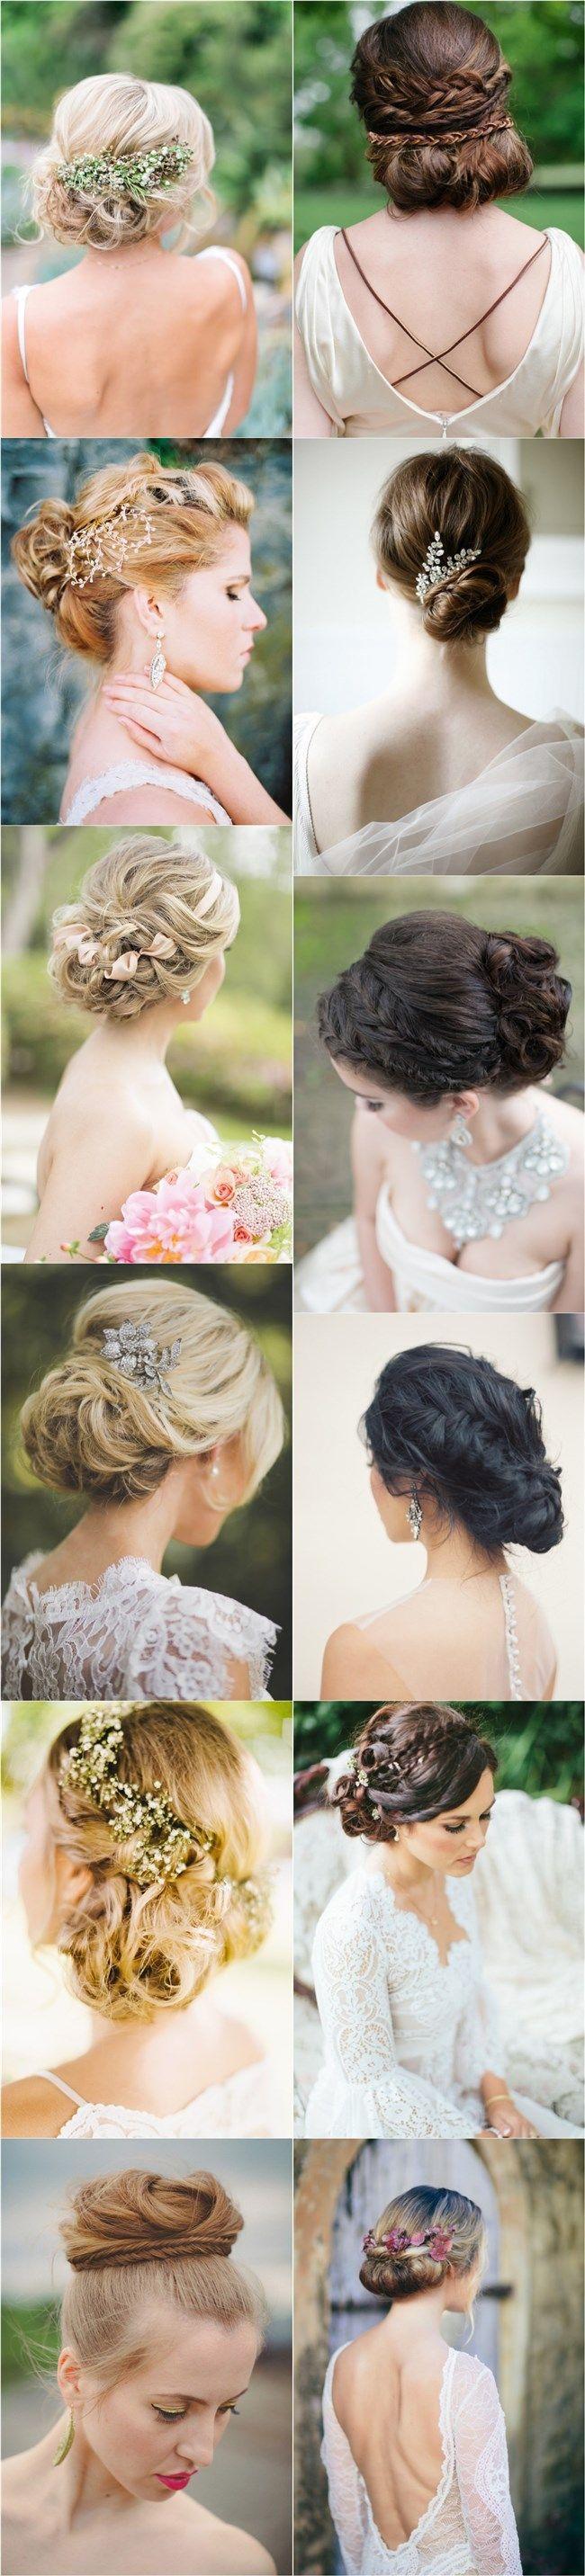 Wedding - 30 Fabulous Most Pinned Updos For Wedding (with Tutorial)